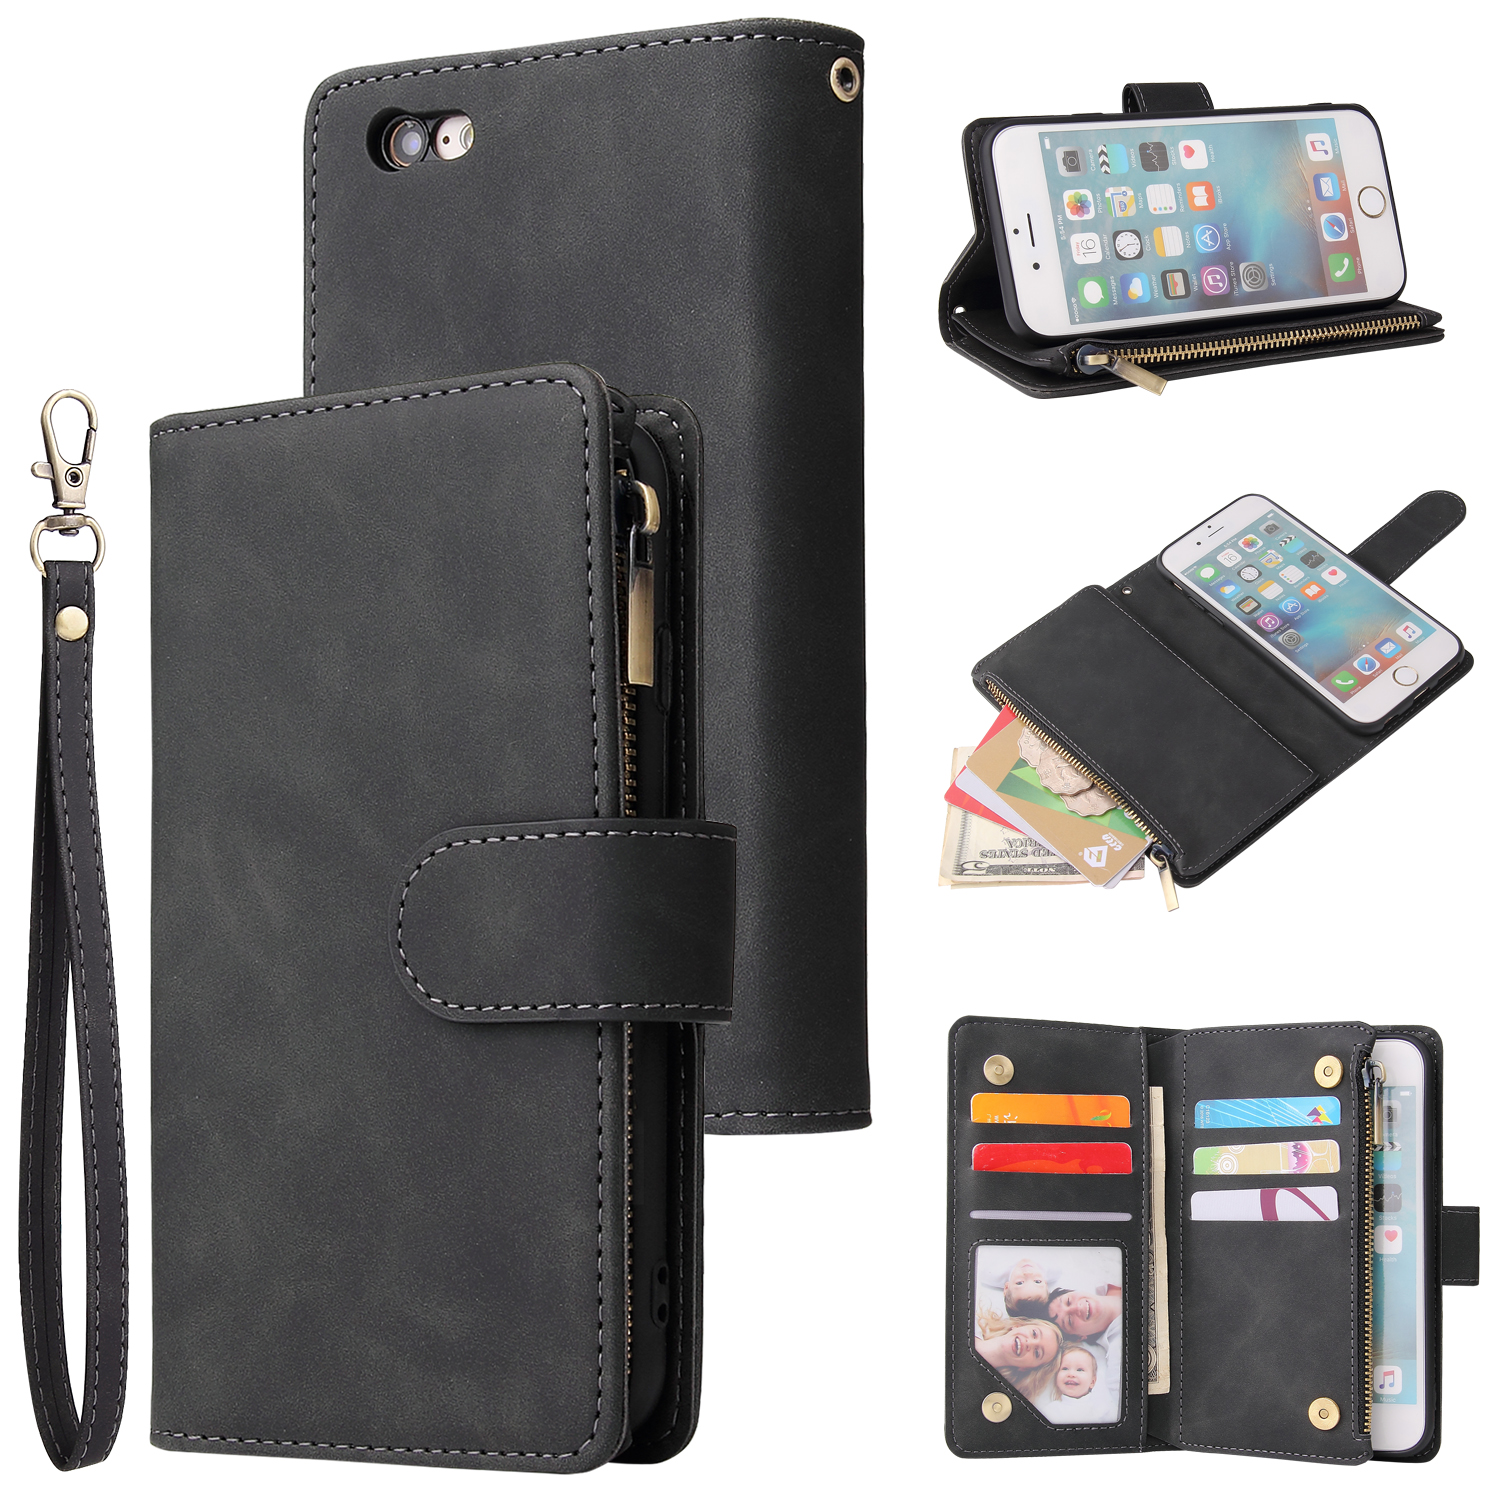 For iPhone 6 / 6S iPhone 6 plus / 6S plus iPhone 7 / 8 iPhone 7 plus / 8 plus Smart Phone Cover Coin Pocket with Cards Bracket Zipper Phone PU Leather Case Phone Cover  iPhone 6 / 6S